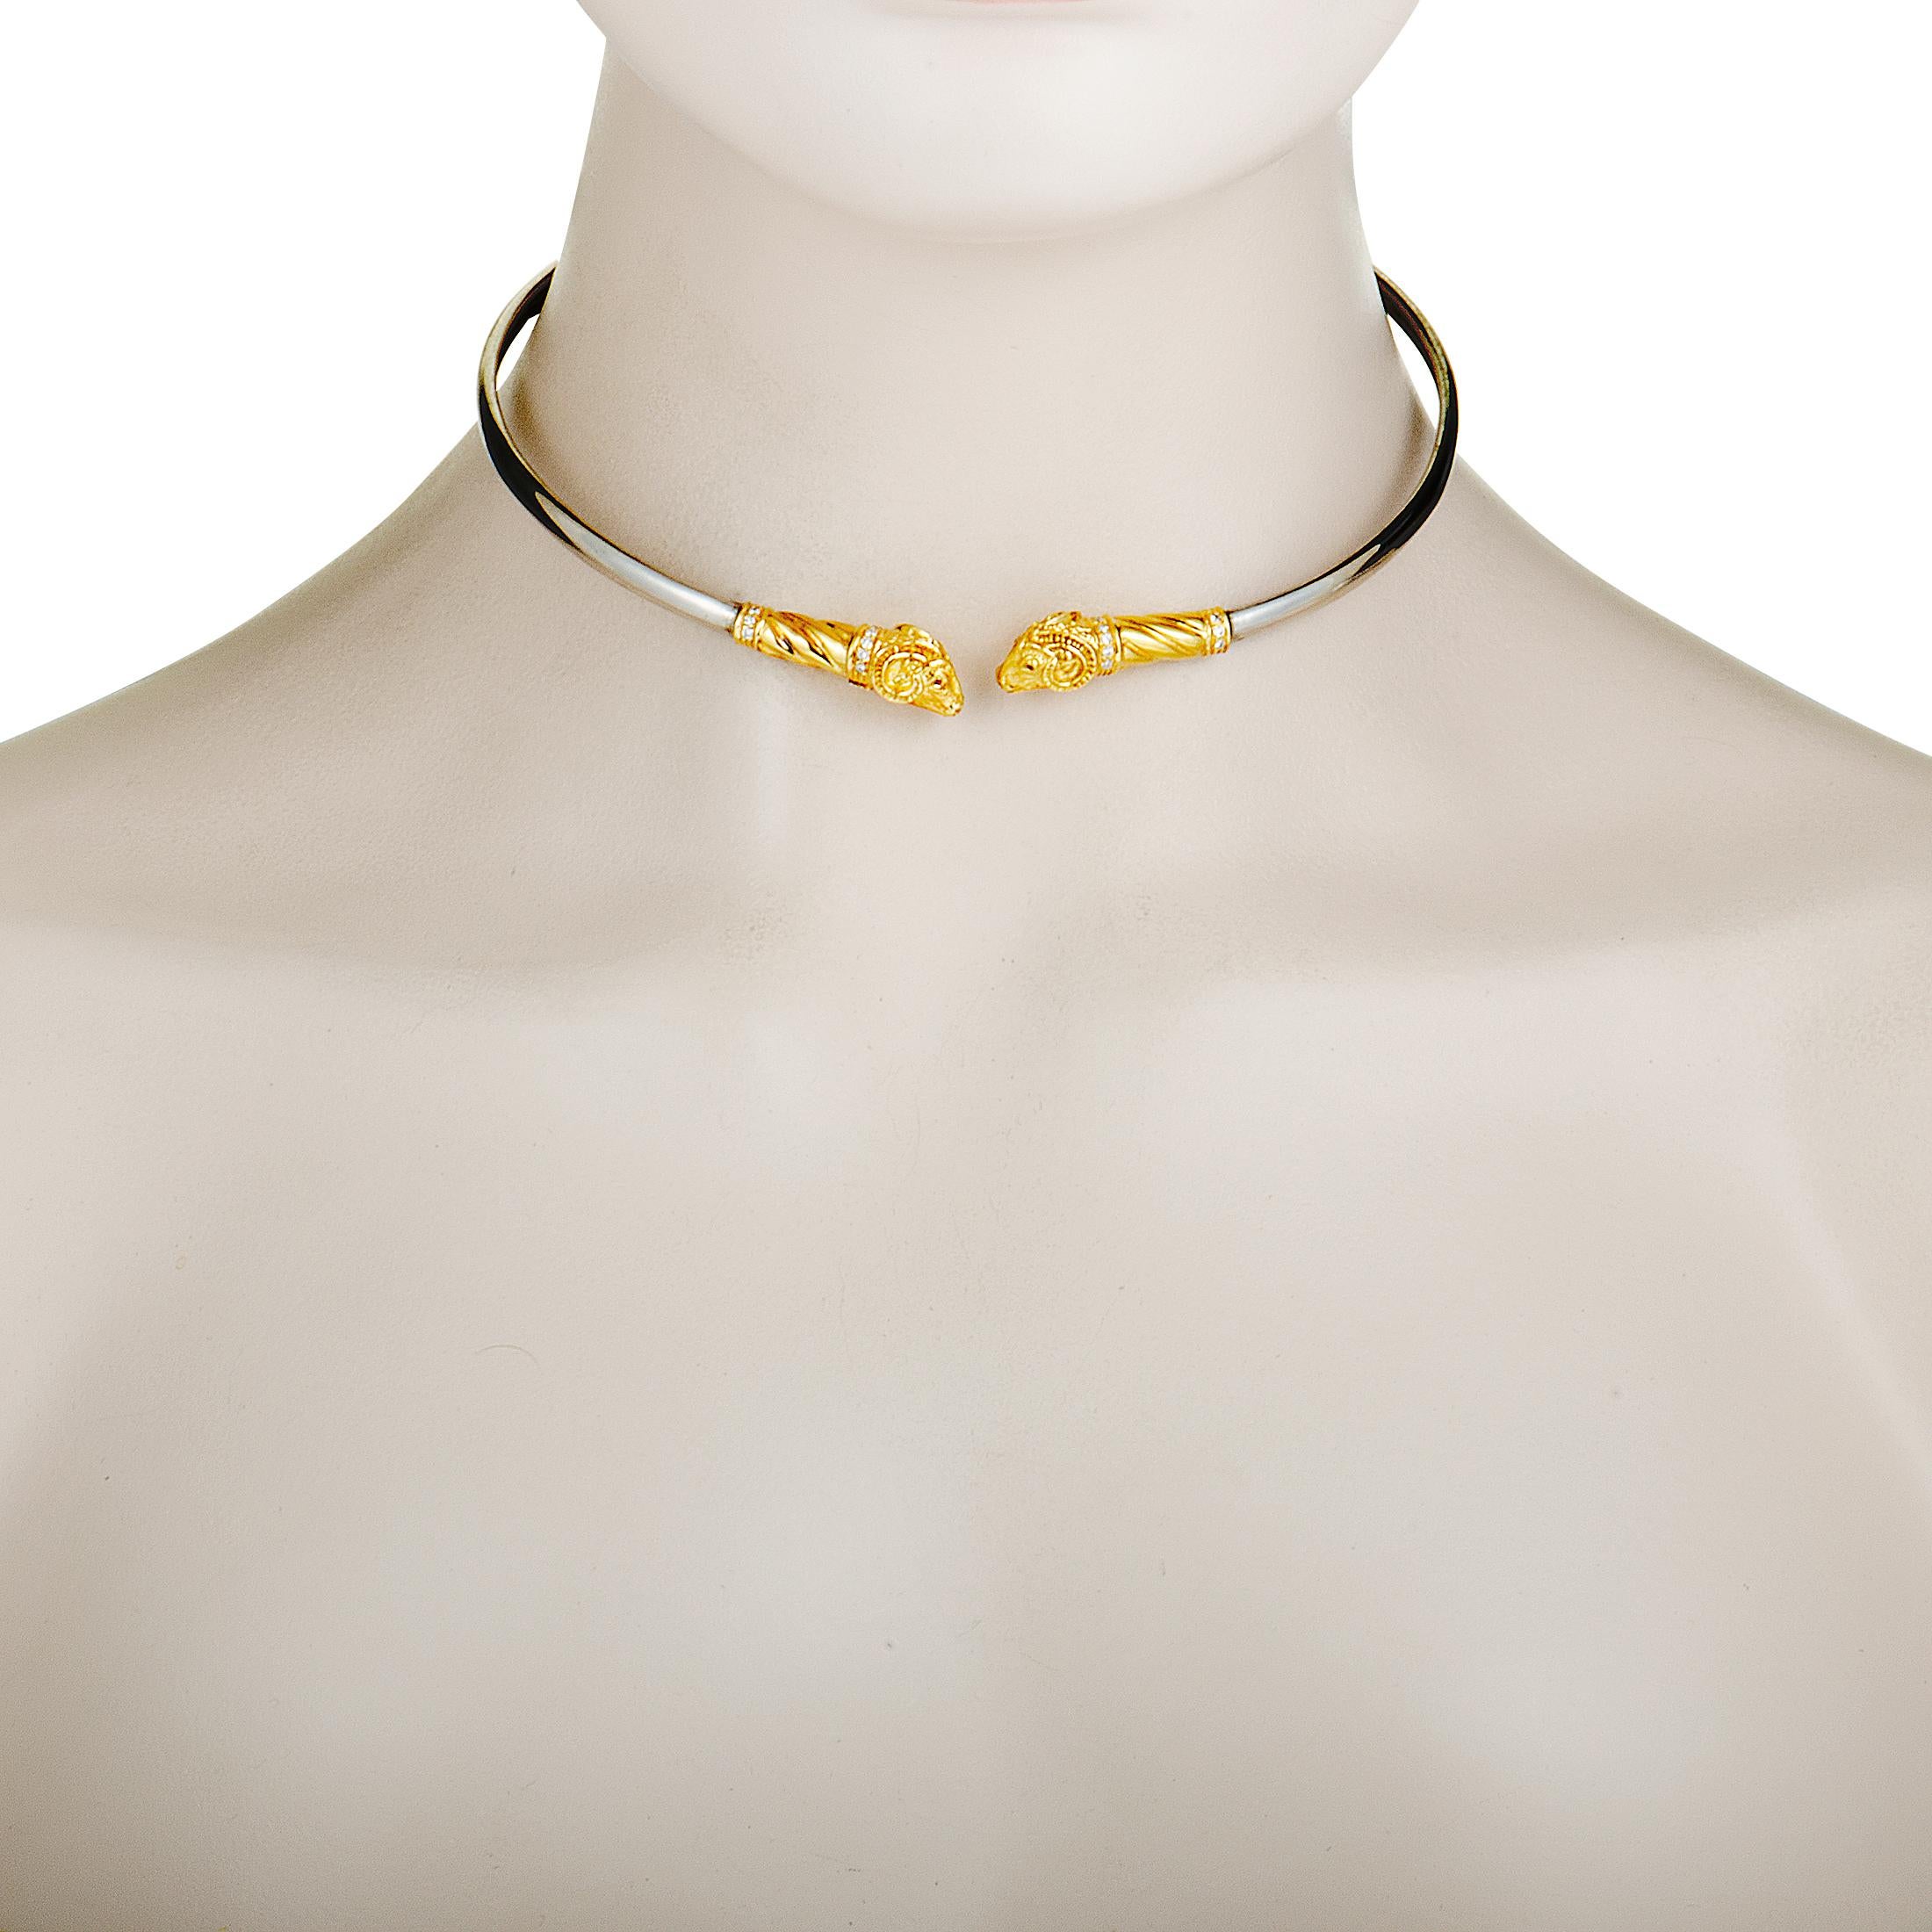 Accentuated with two exquisite ram motifs that are presented in alluring gold, this superb 18K yellow gold and silver necklace from Zolotas will add a stunningly fashionable touch to your ensembles with a distinct hint of luxe allure. The necklace